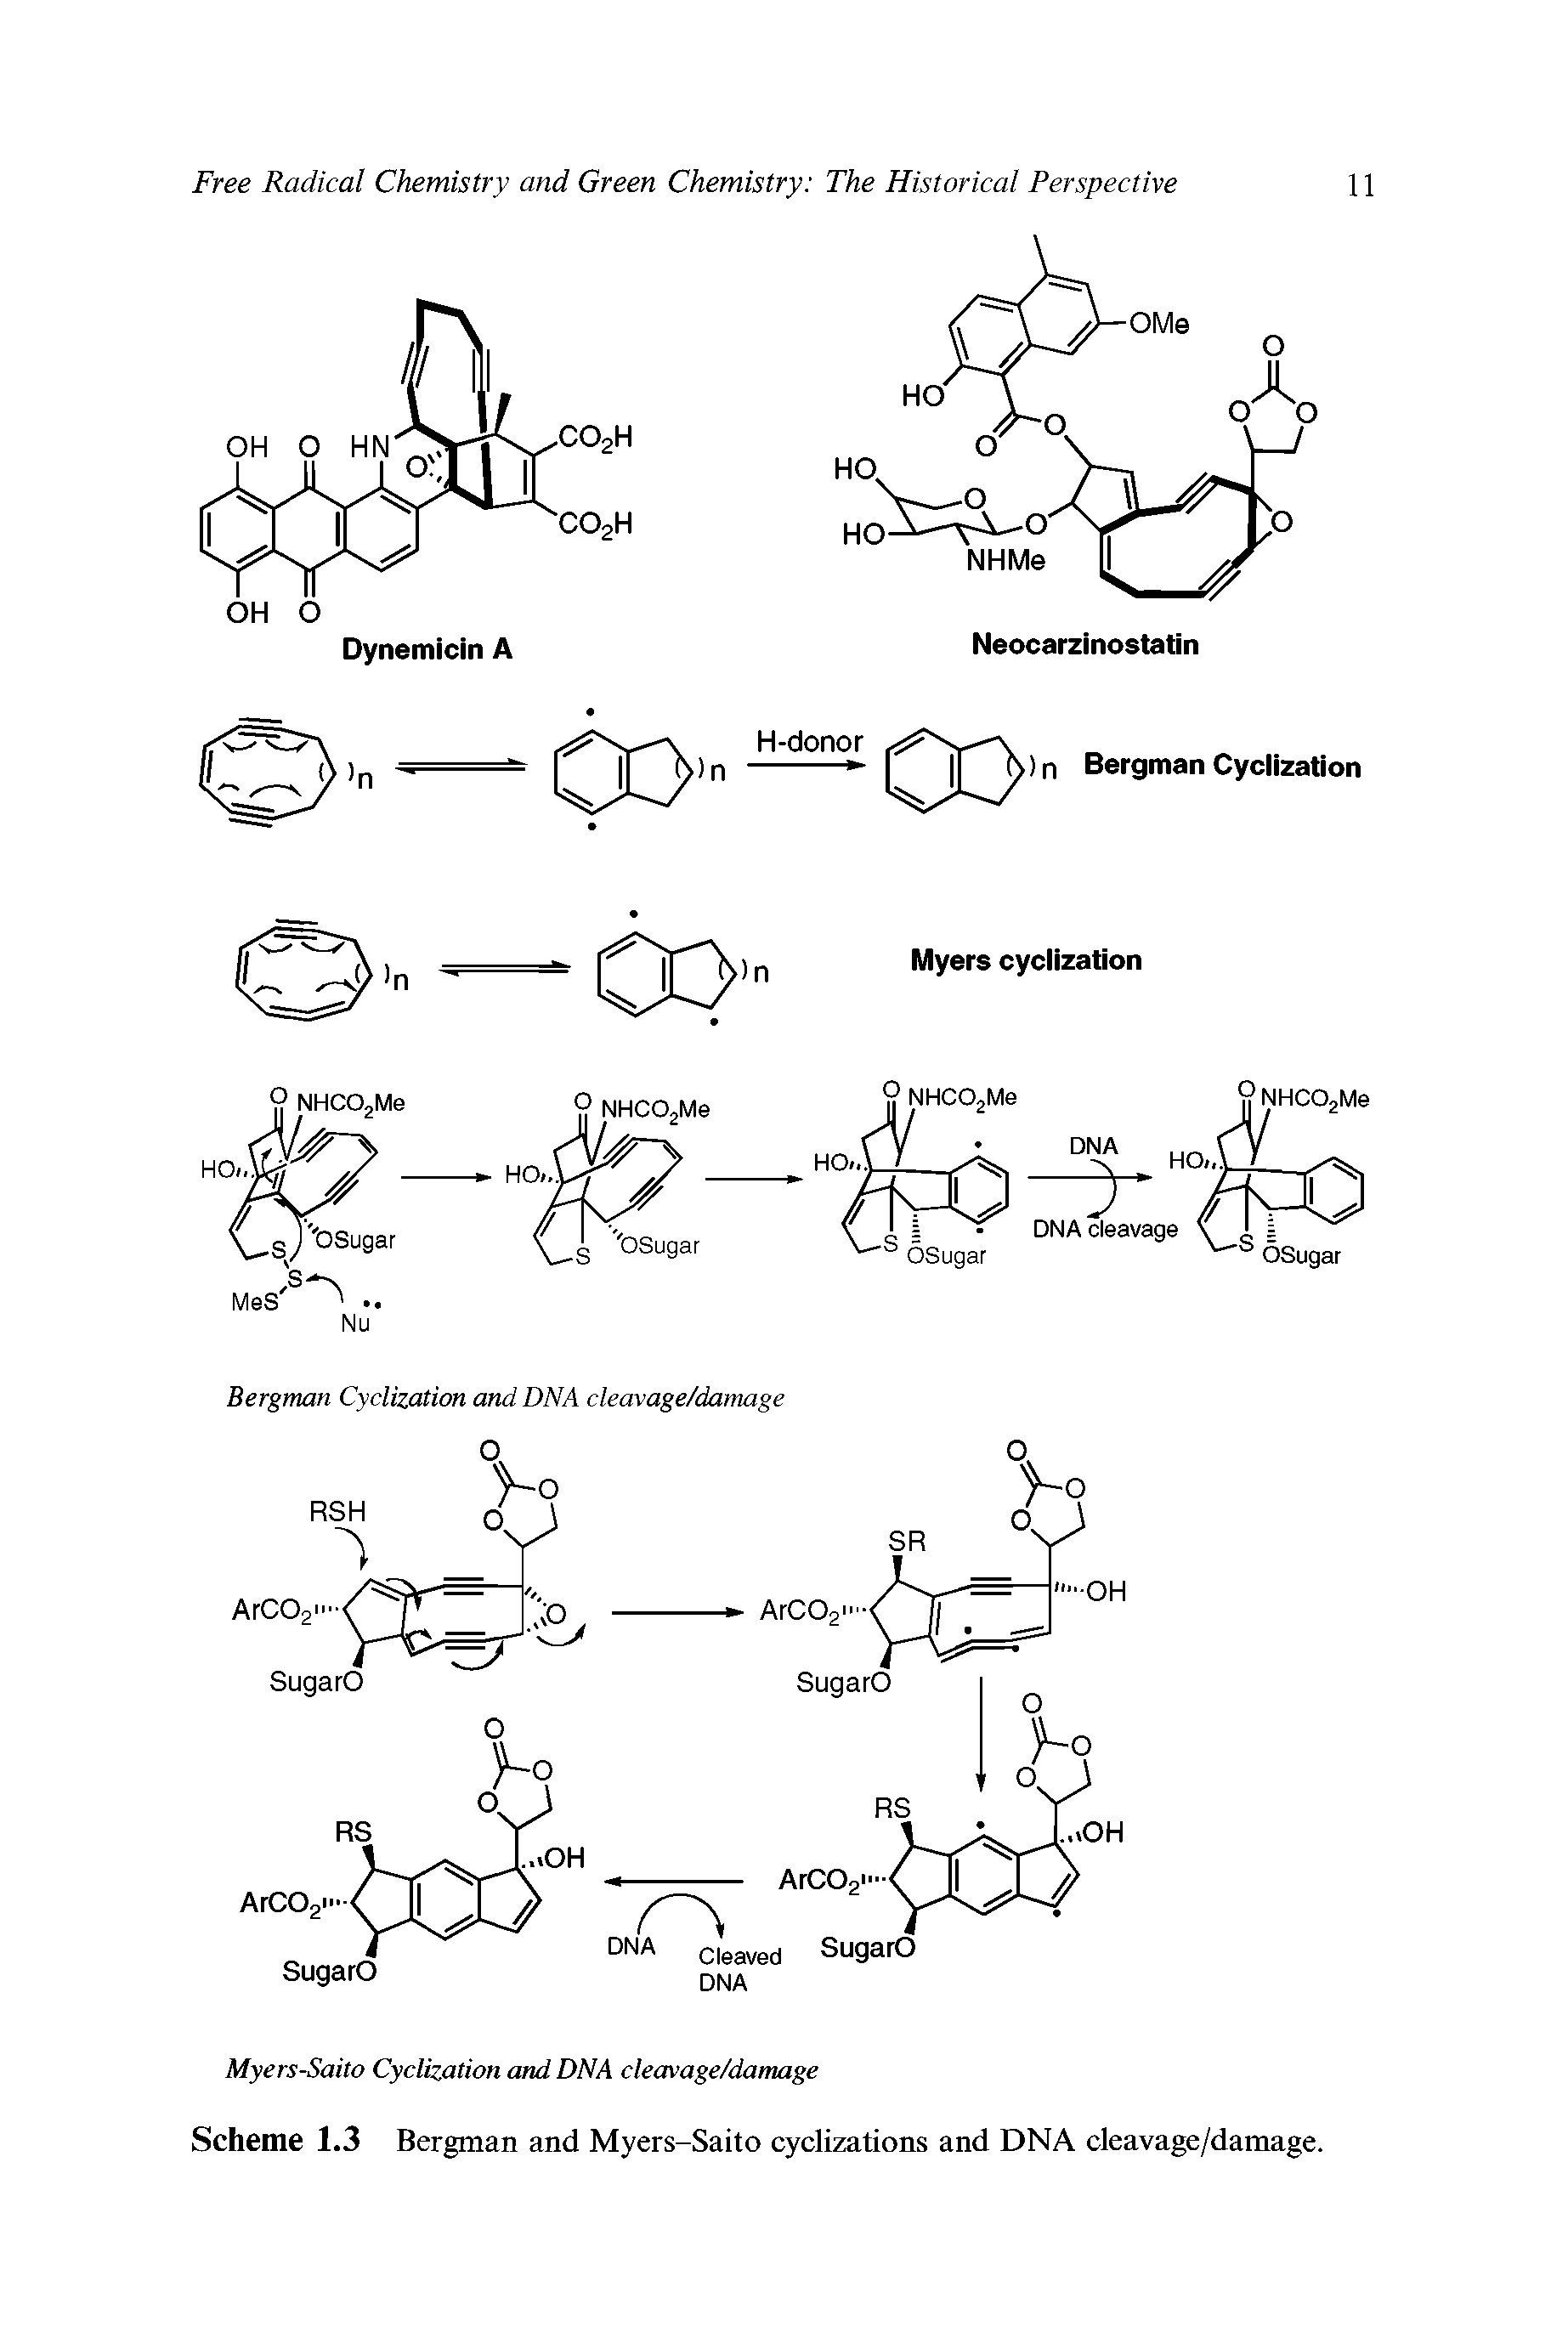 Scheme 1.3 Bergman and Myers-Saito cyclizations and DNA cleavage/damage.